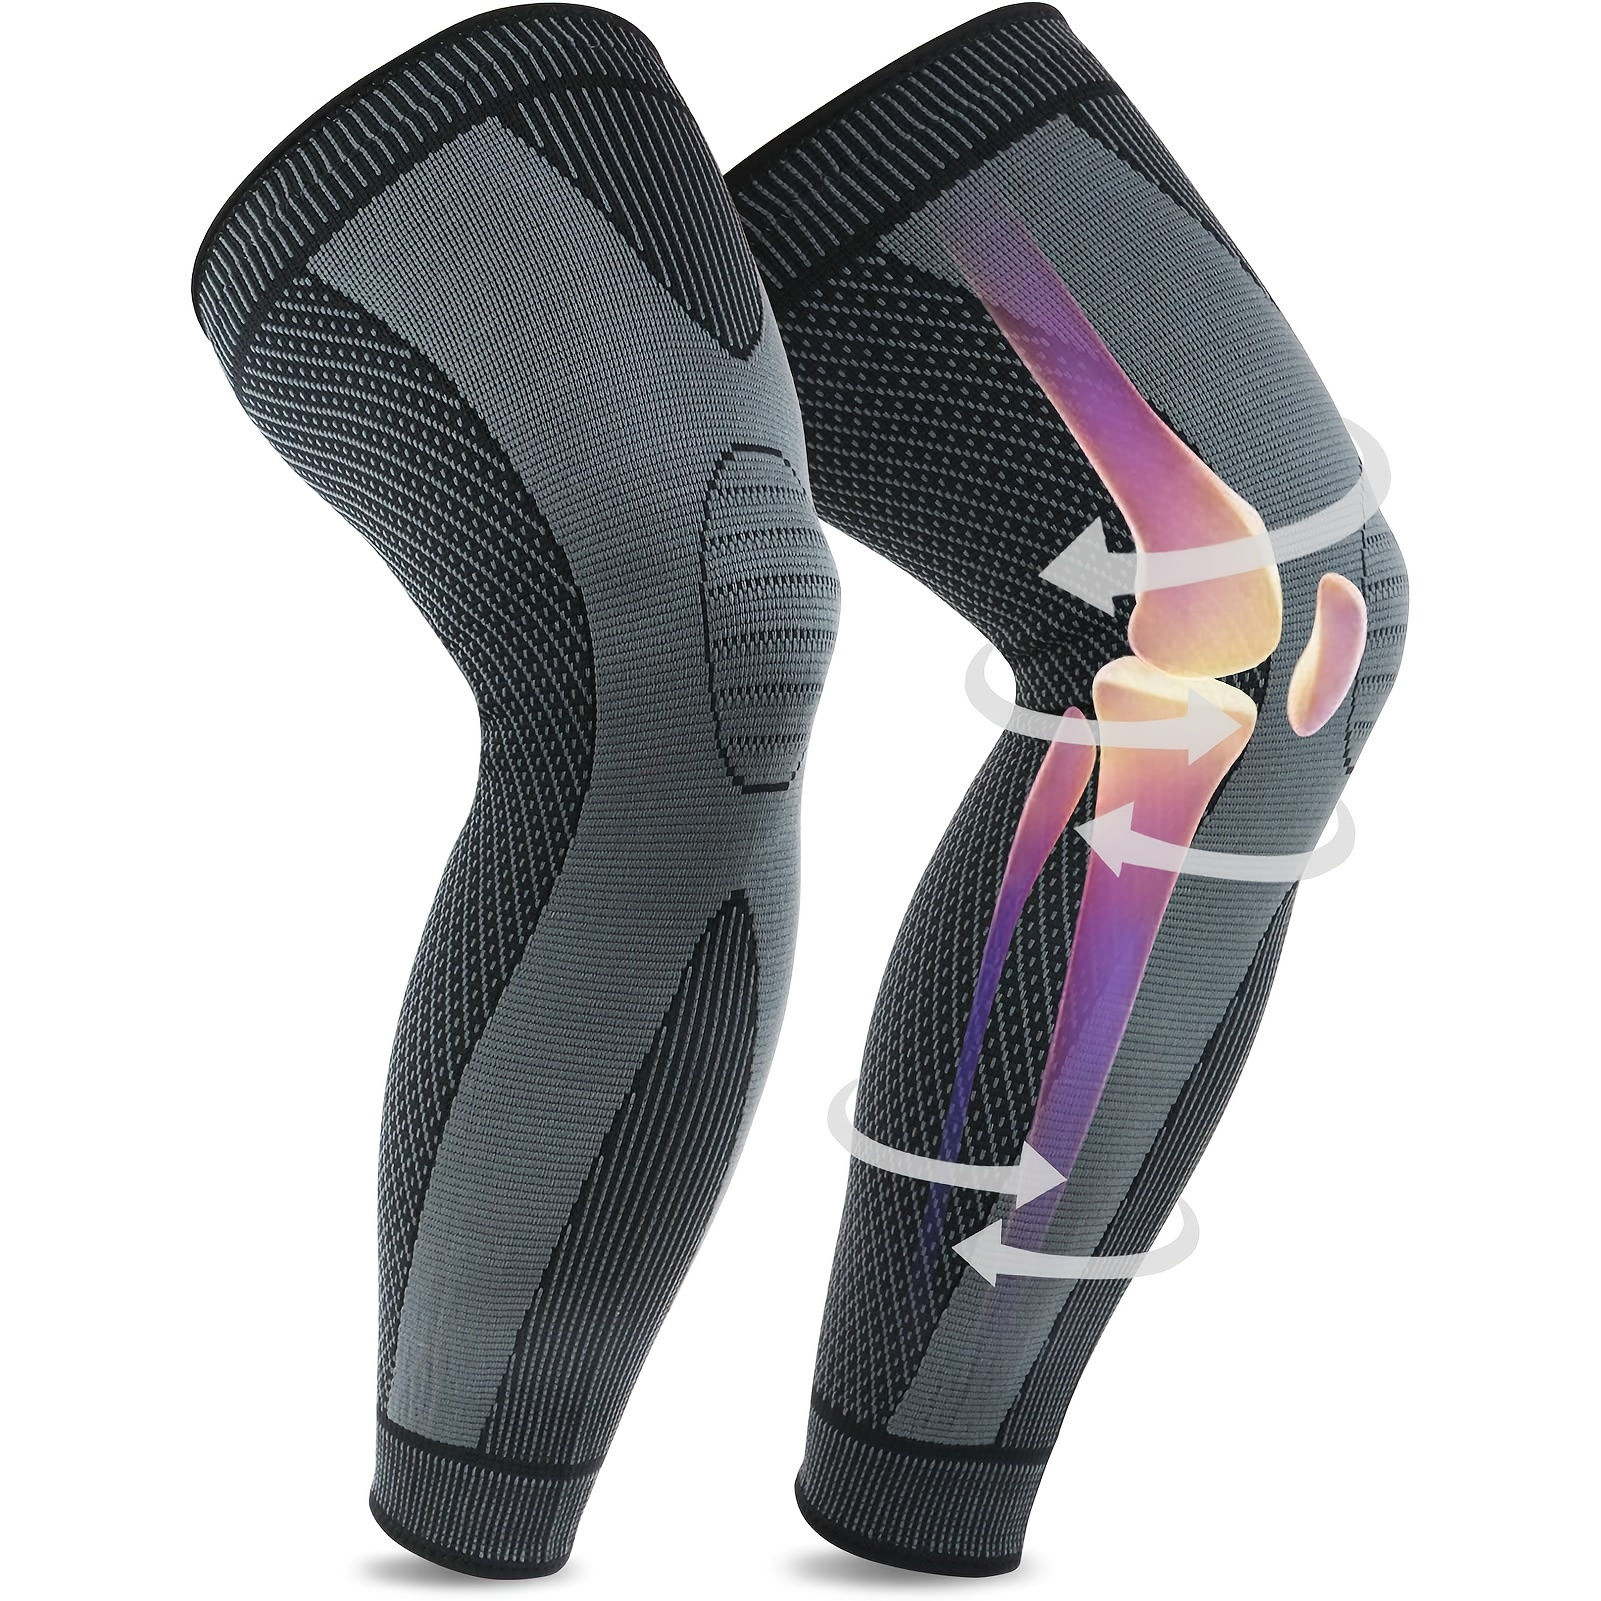 1Pair (2pcs) Knee Pads Long Compression Leg Sleeves Braces for